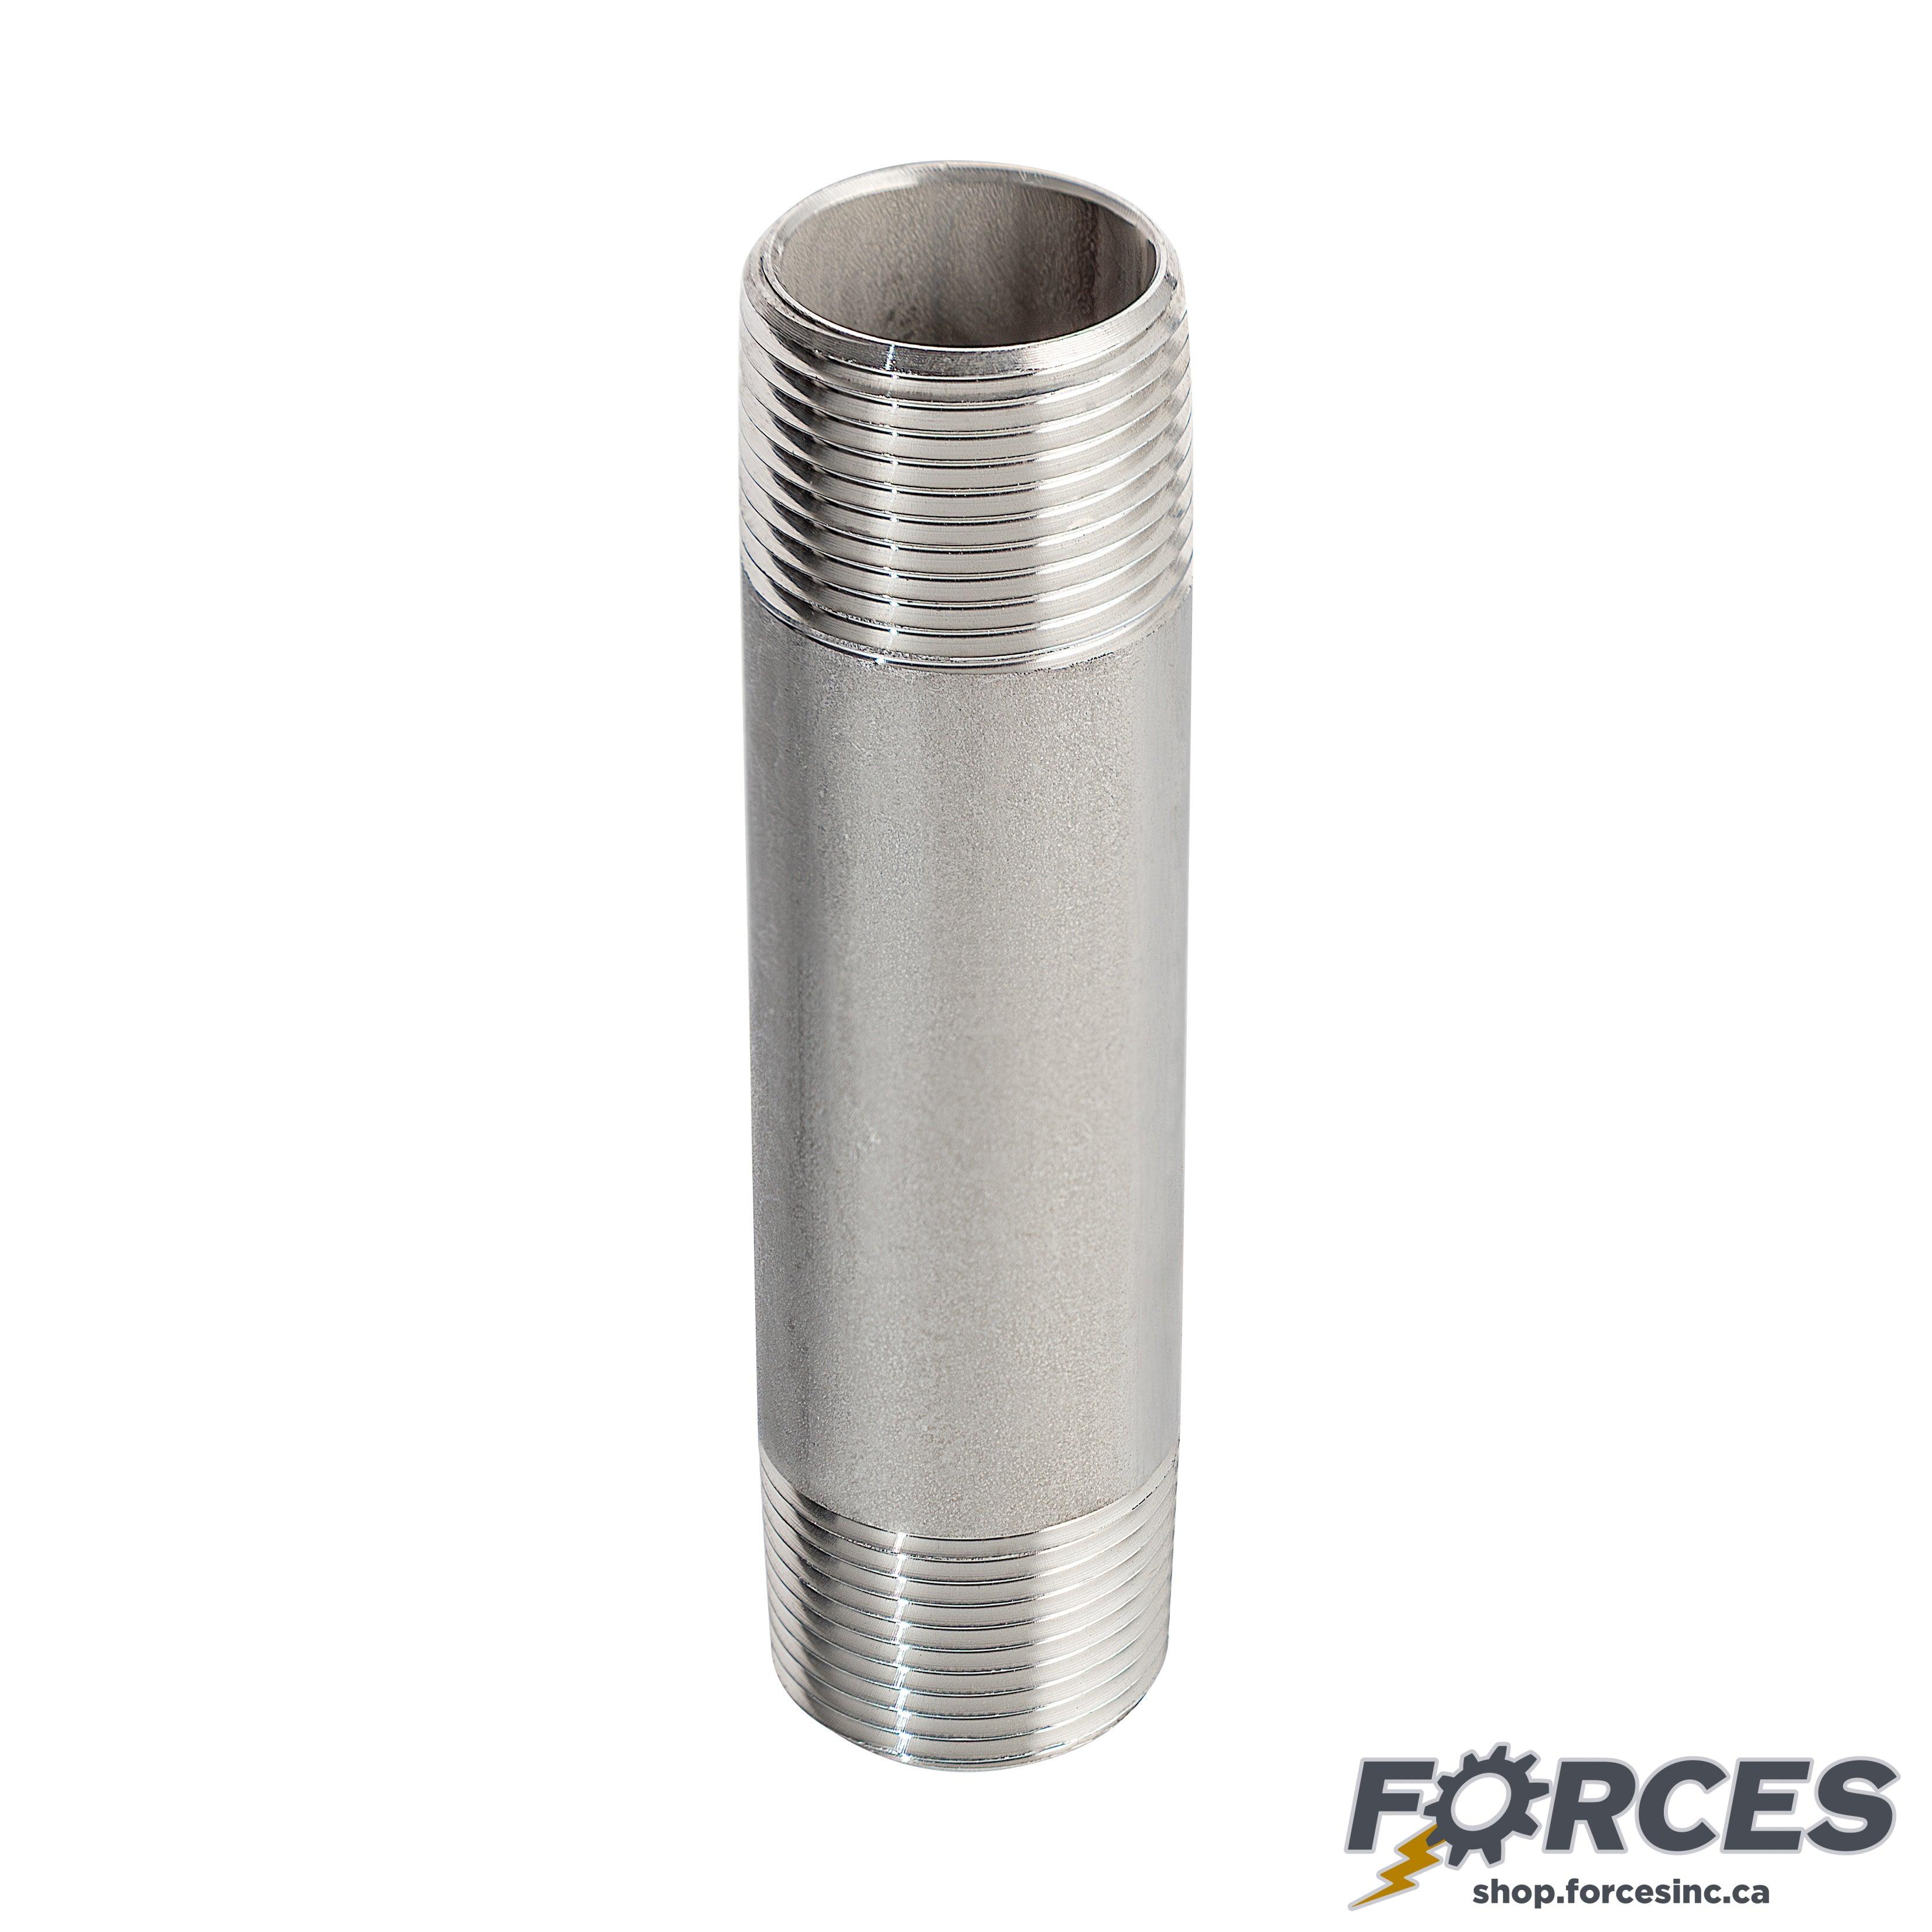 3/4" X 1-1/2" Long Nipple - Stainless Steel 316 - Forces Inc